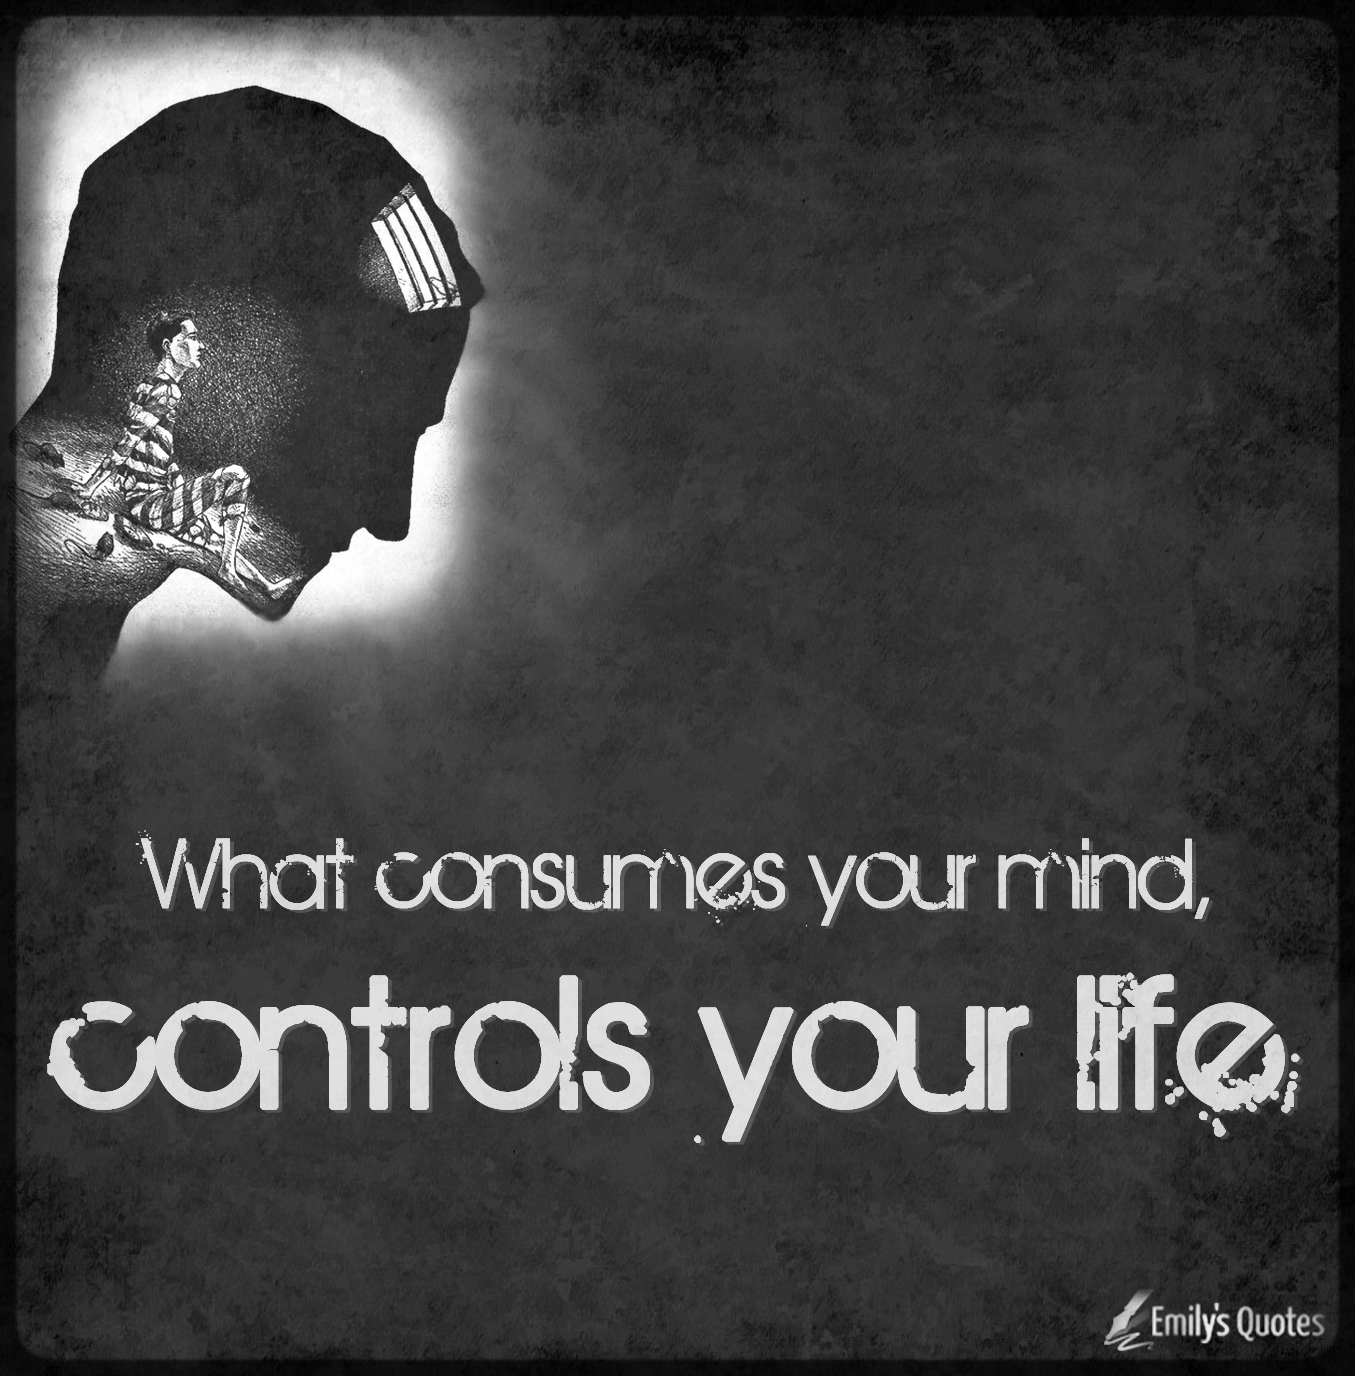 What consumes your mind, controls your life